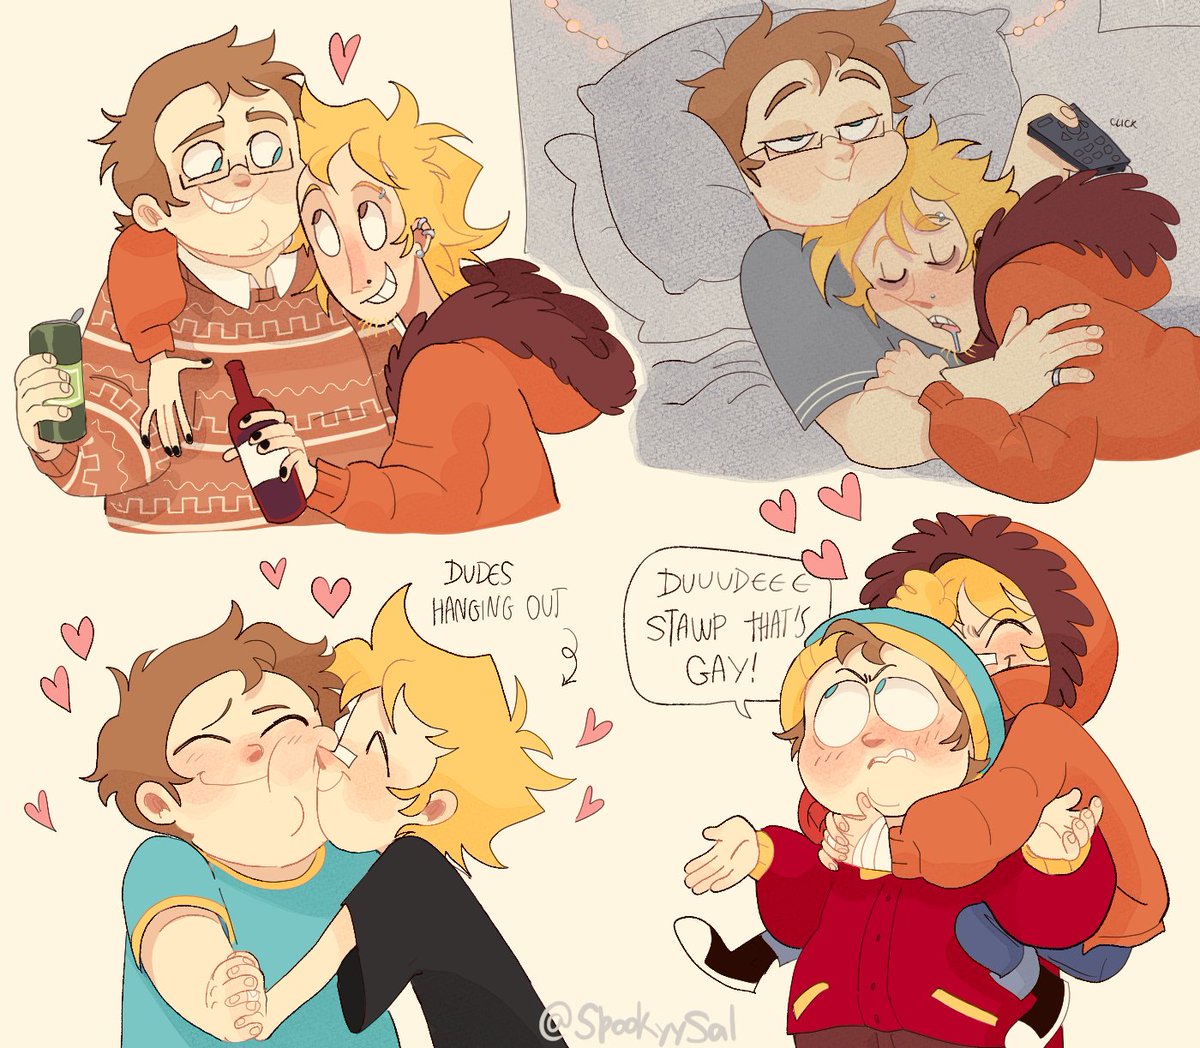 As promised, i drew my Cartman ship for Halloween 👻👻👻
I just think from all Cartman ships this one can be the healthiest
#SouthPark #southparkart